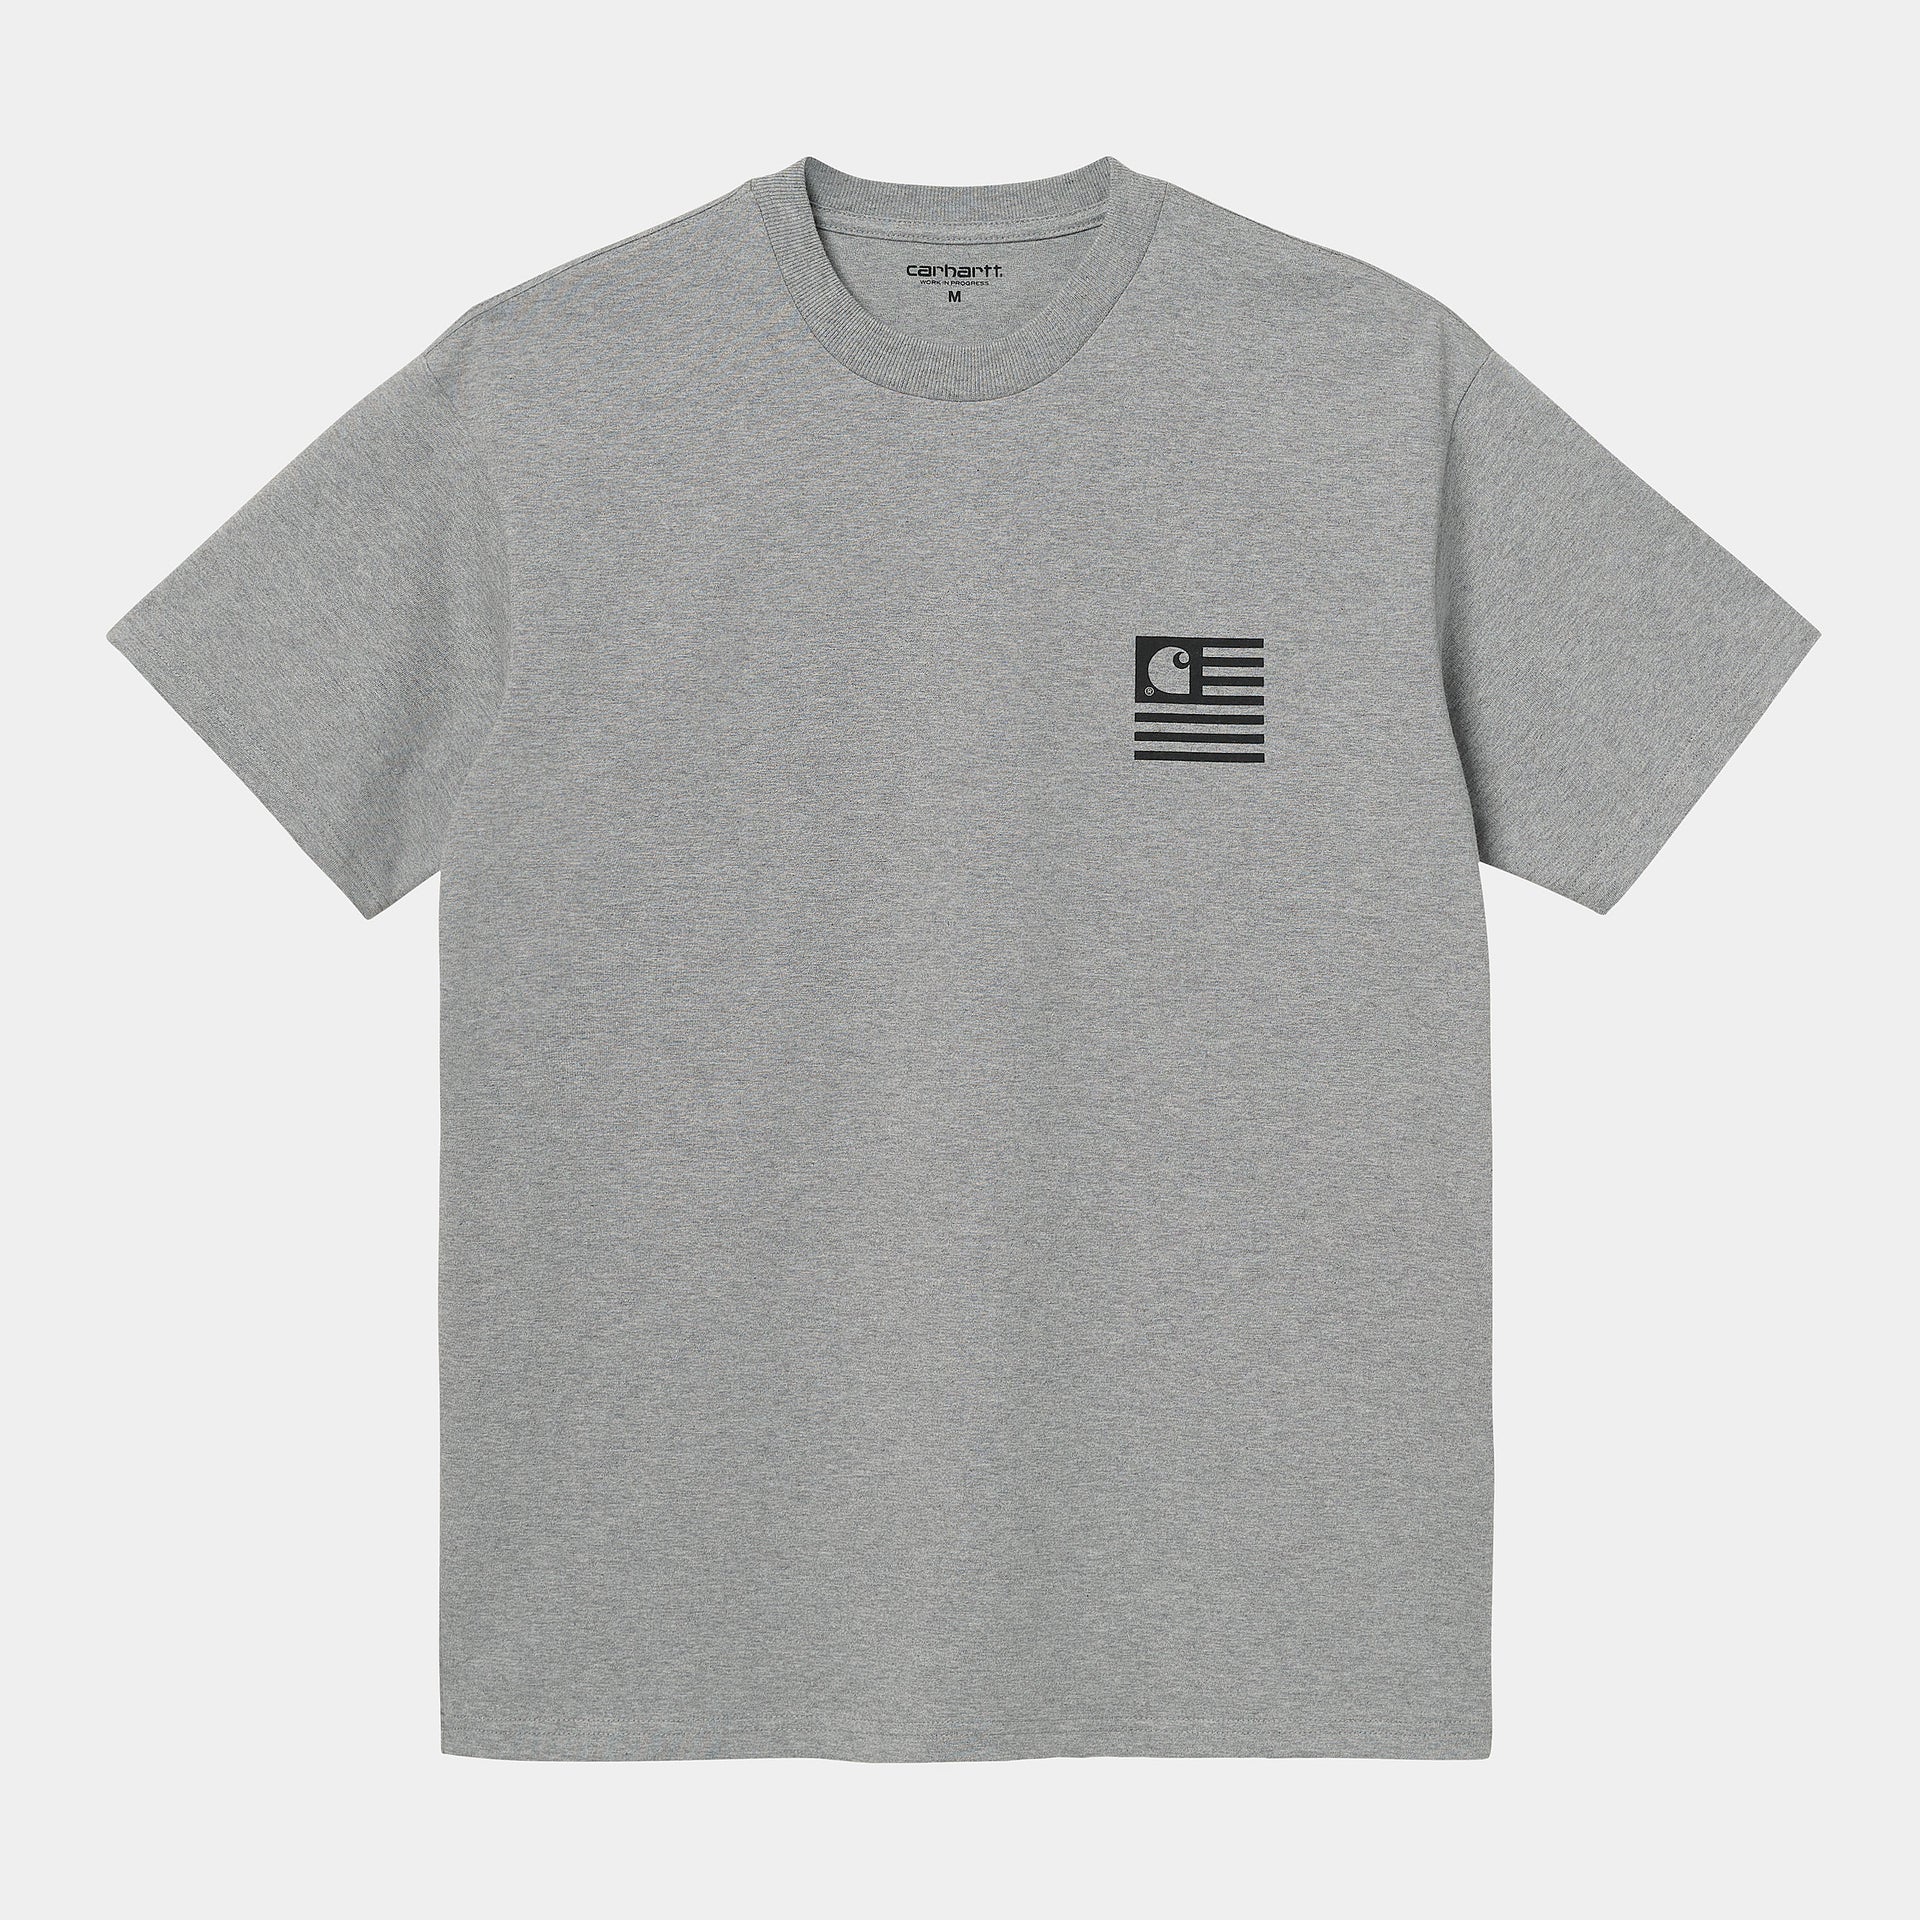 S/S State T-Shirt Ash Heather